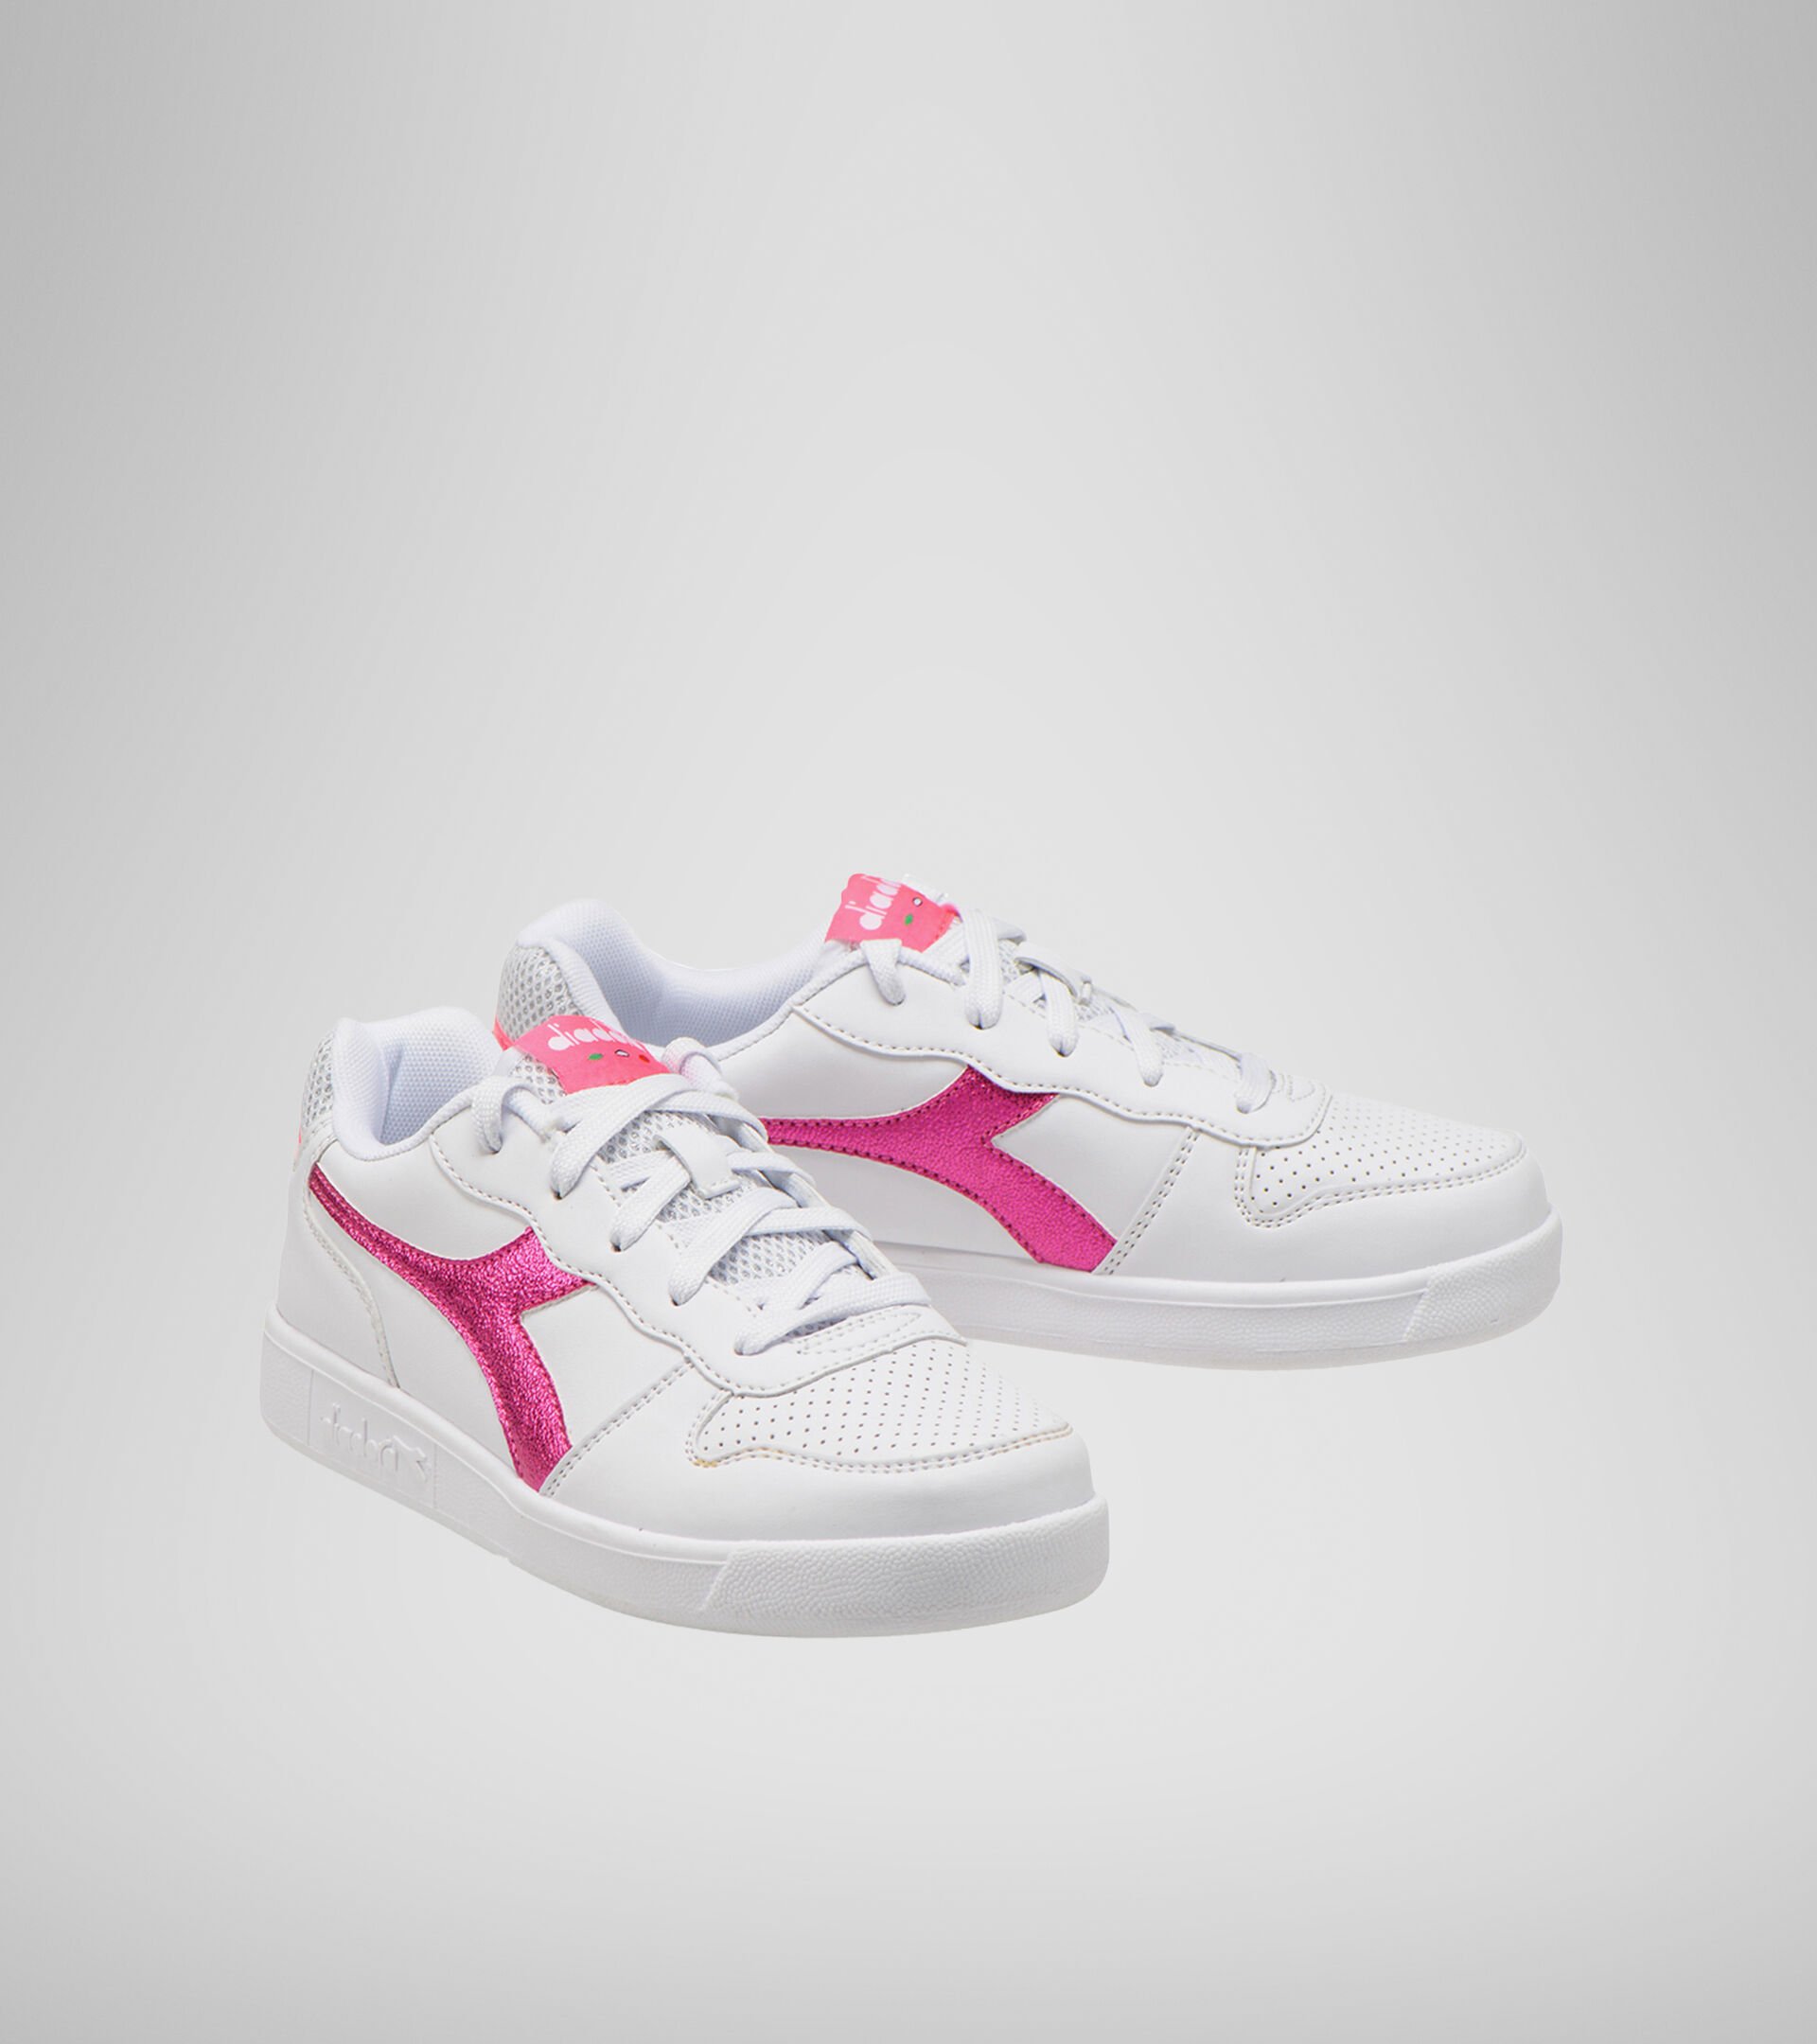 Sports shoes - Youth 8-16 years PLAYGROUND GS GIRL WHITE/PINK FLUO - Diadora